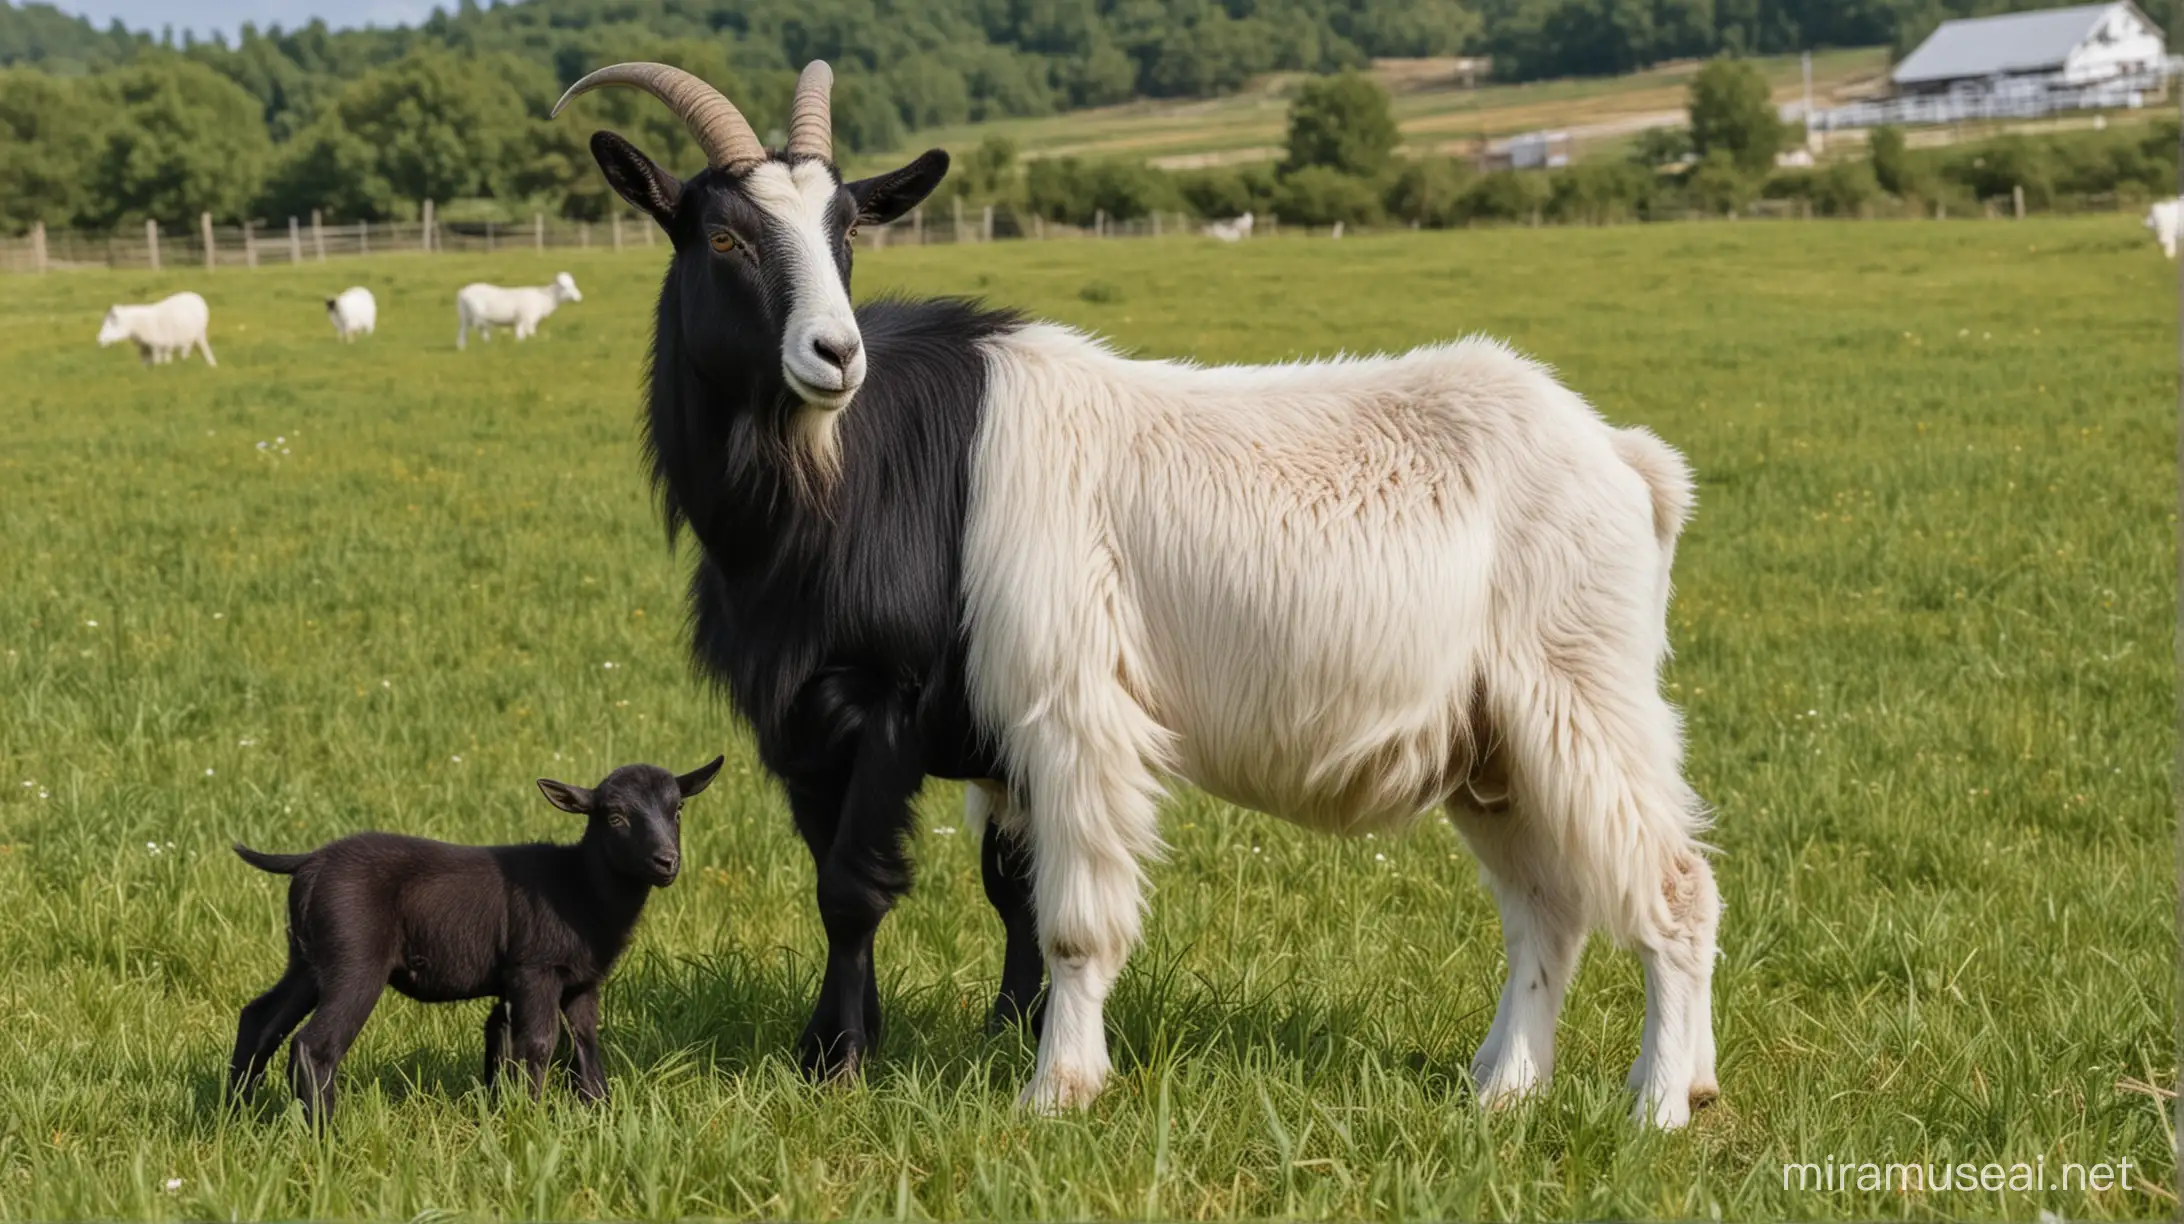 Black Mother Goat and Baby Goat Grazing in the Fields